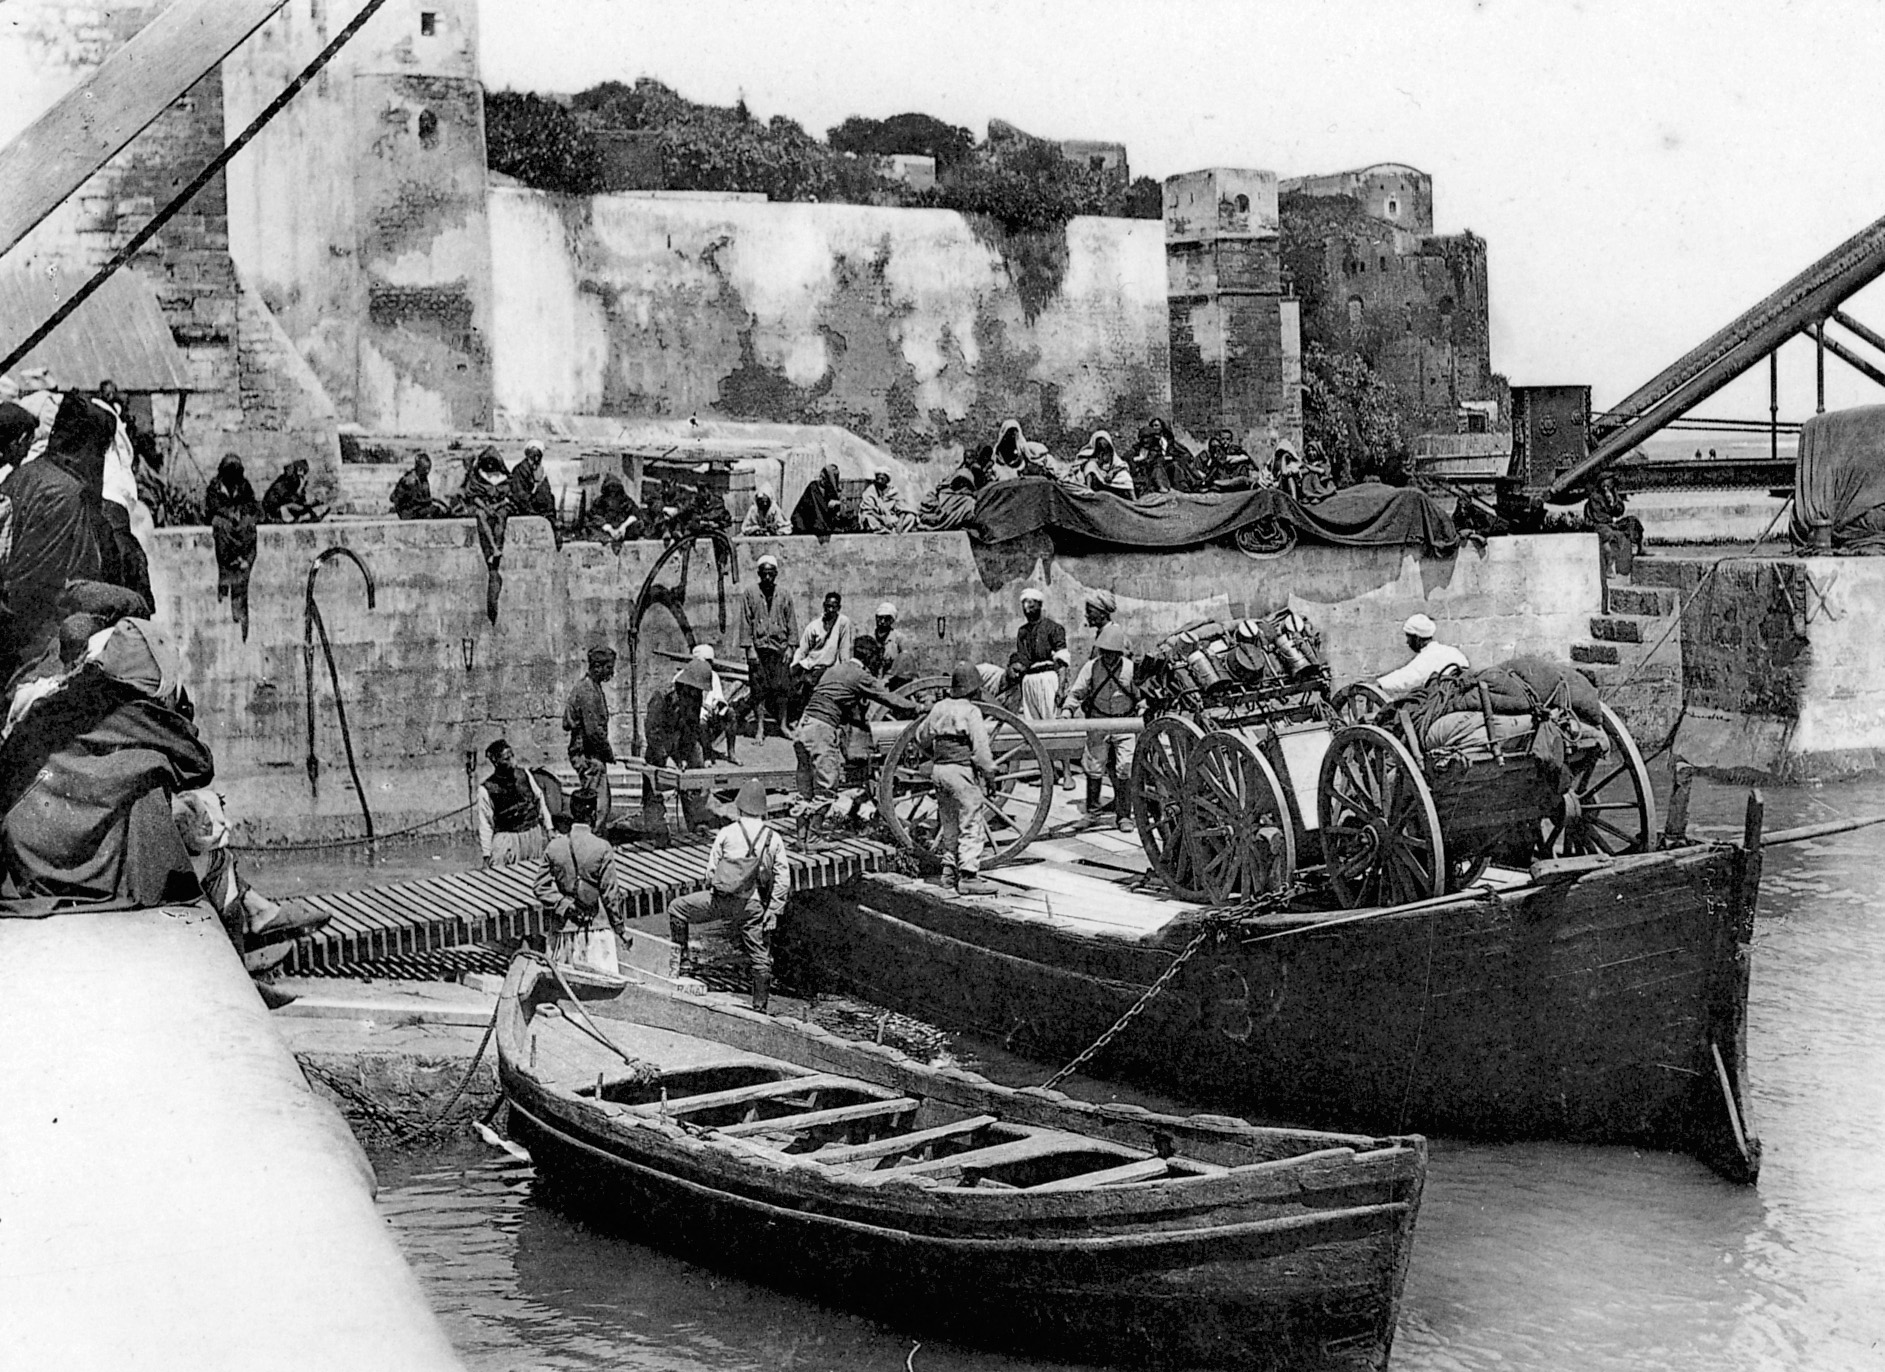 French guns are loaded onto boats in Rabat for ferrying across the Bou Regreg River in western Morocco in 1911.